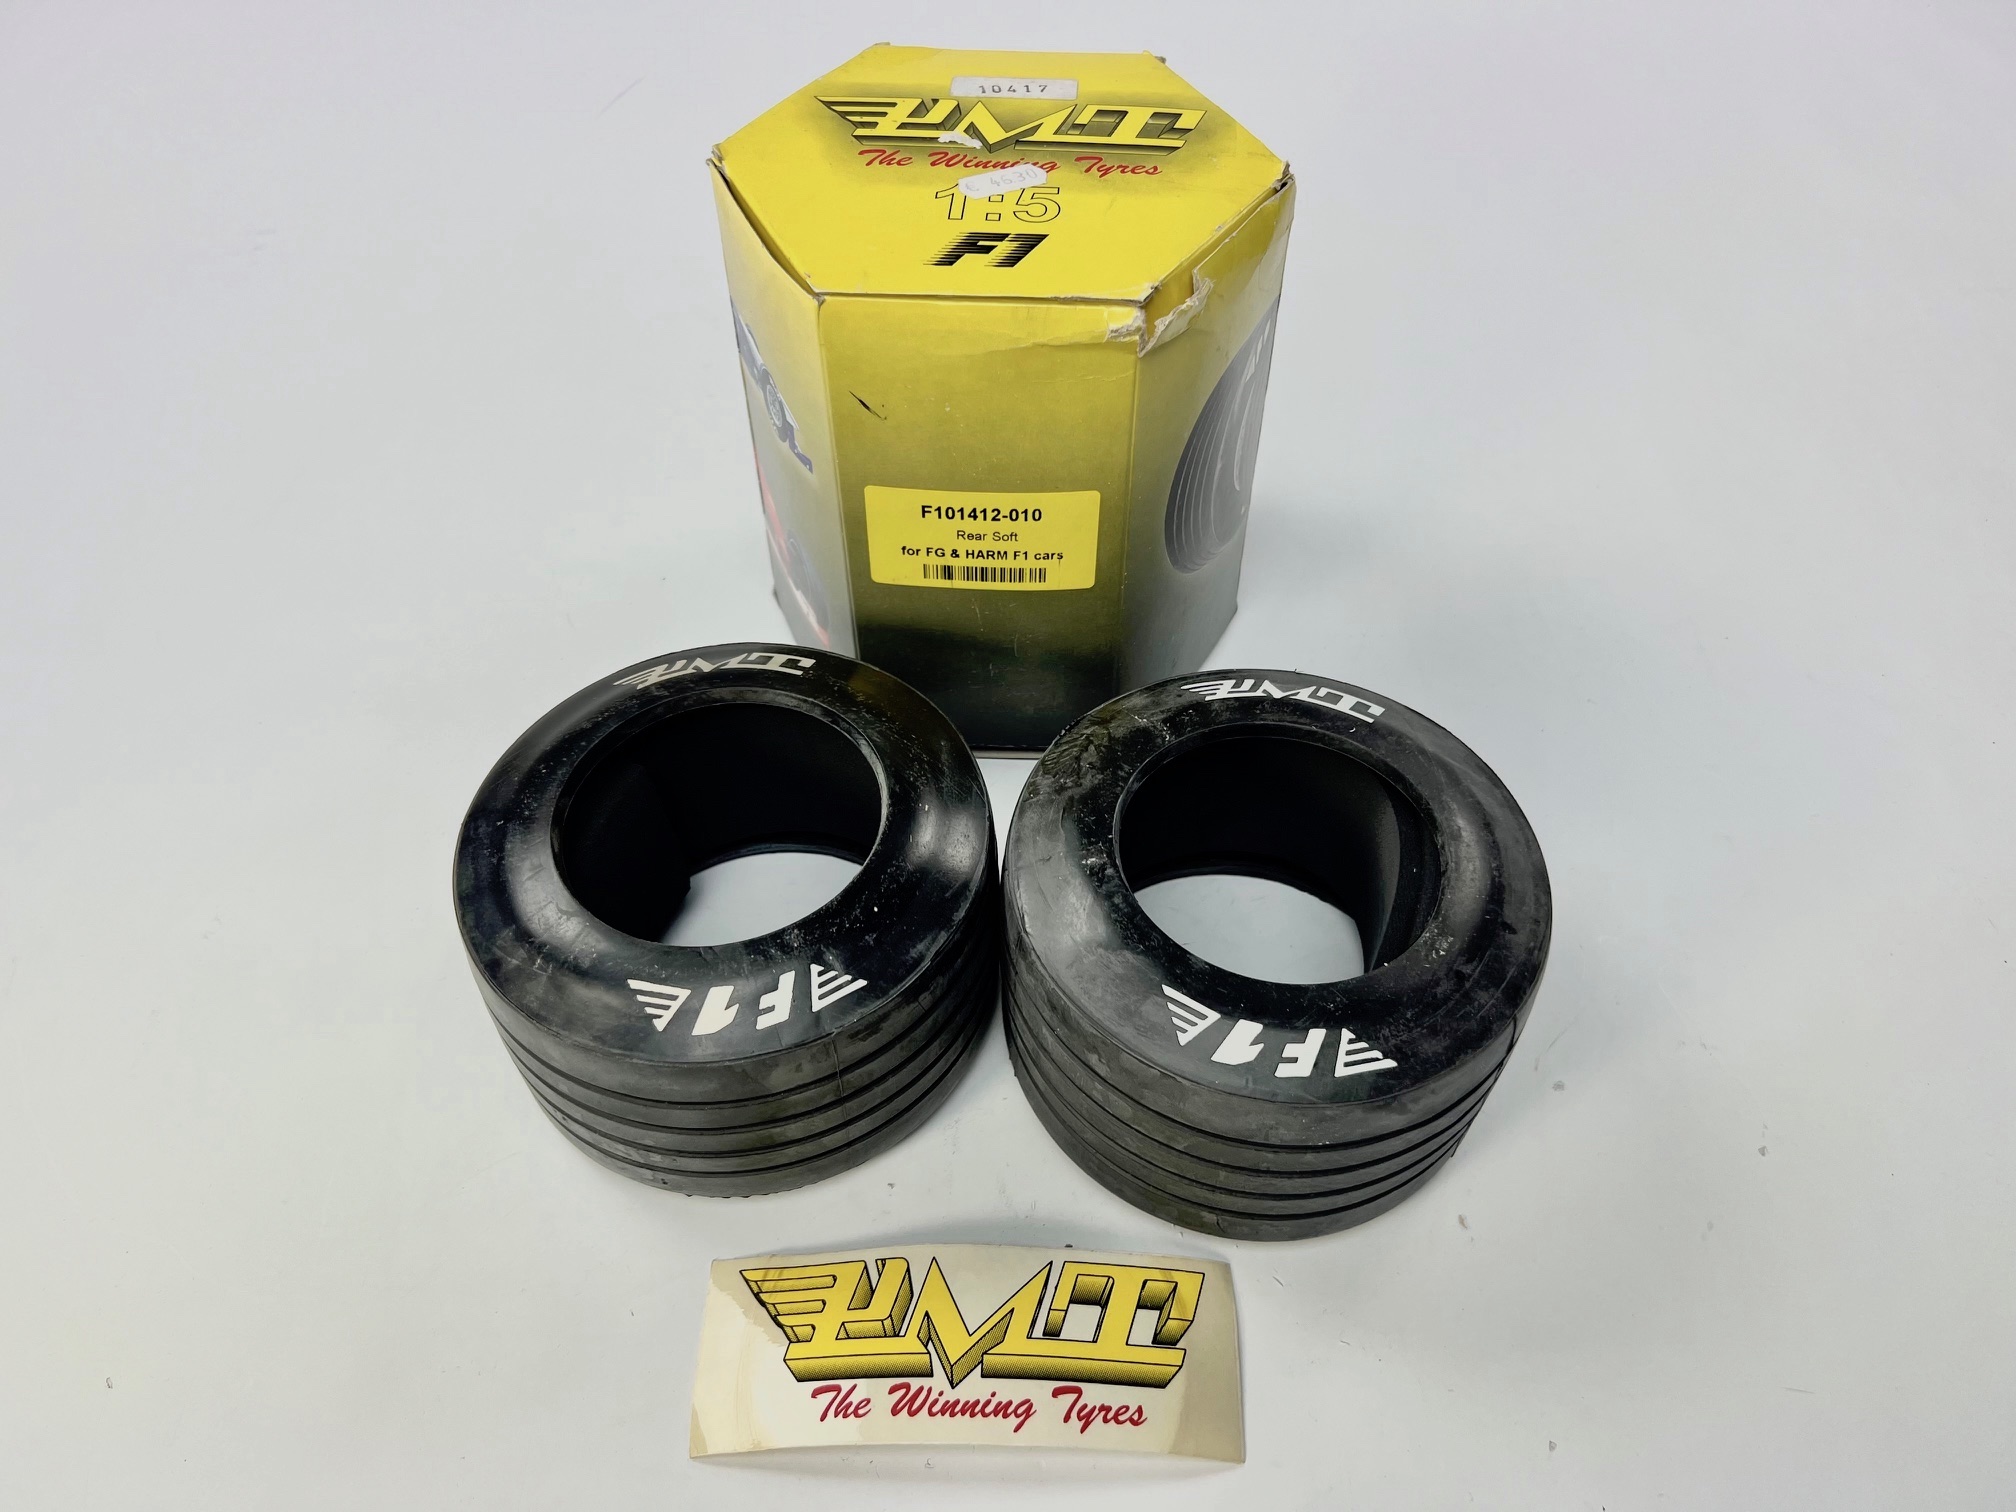 PMT Formula 1 tyres with insert F101412-010, 1 pair